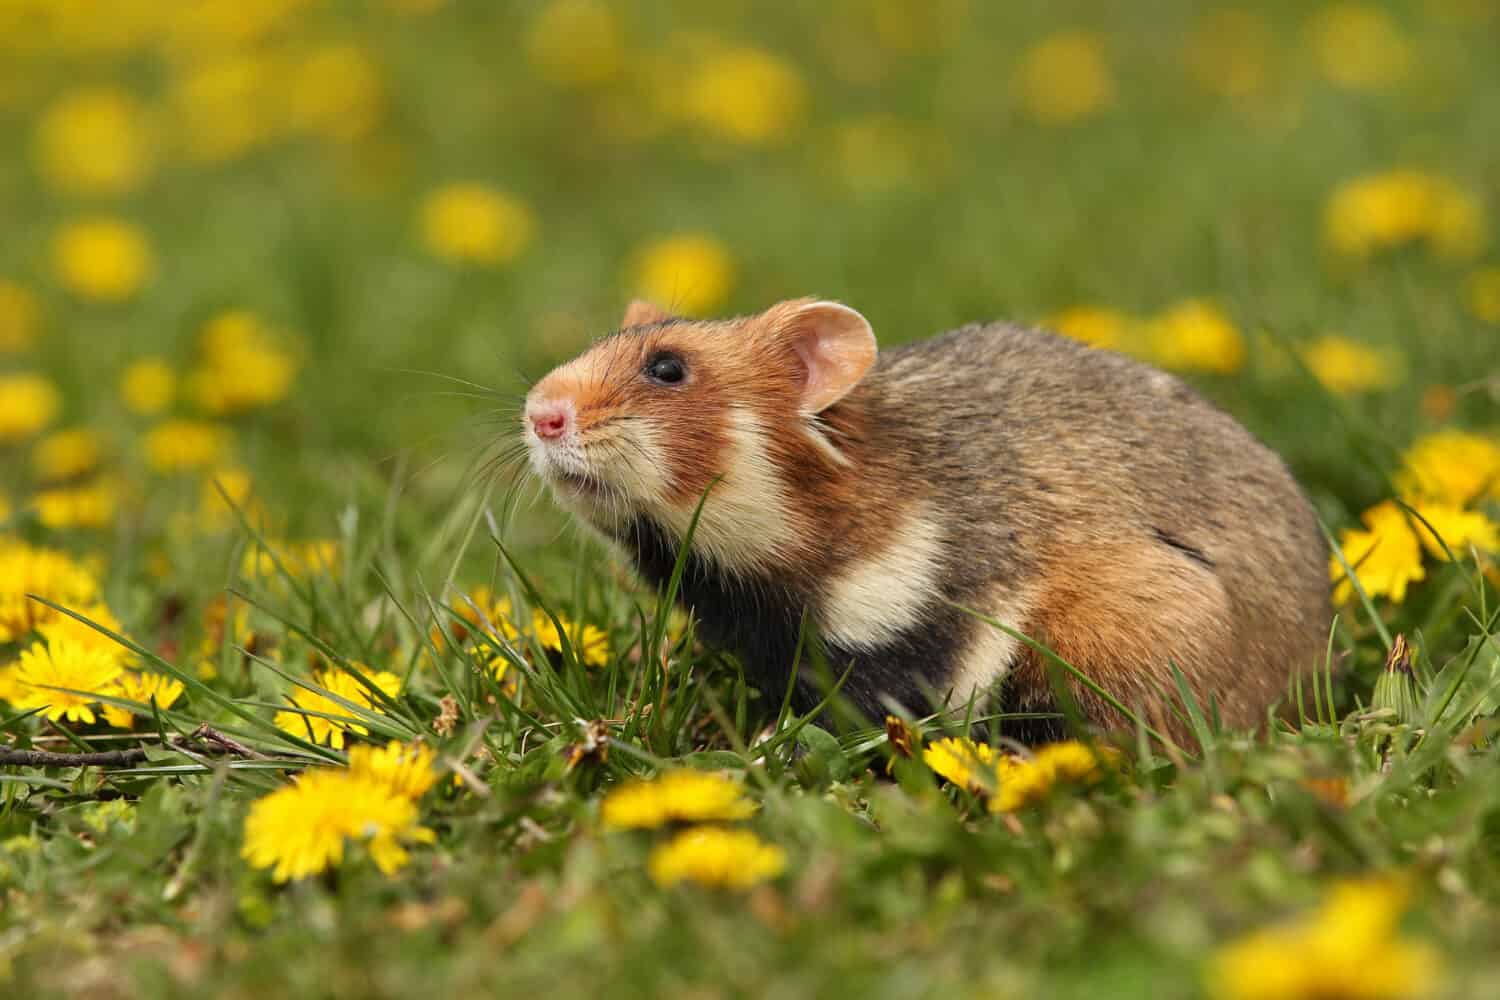 European hamster on a flowering meadow. Cute little animal and blooming nature. Cricetus cricetus. Wild animals. European wildlife.